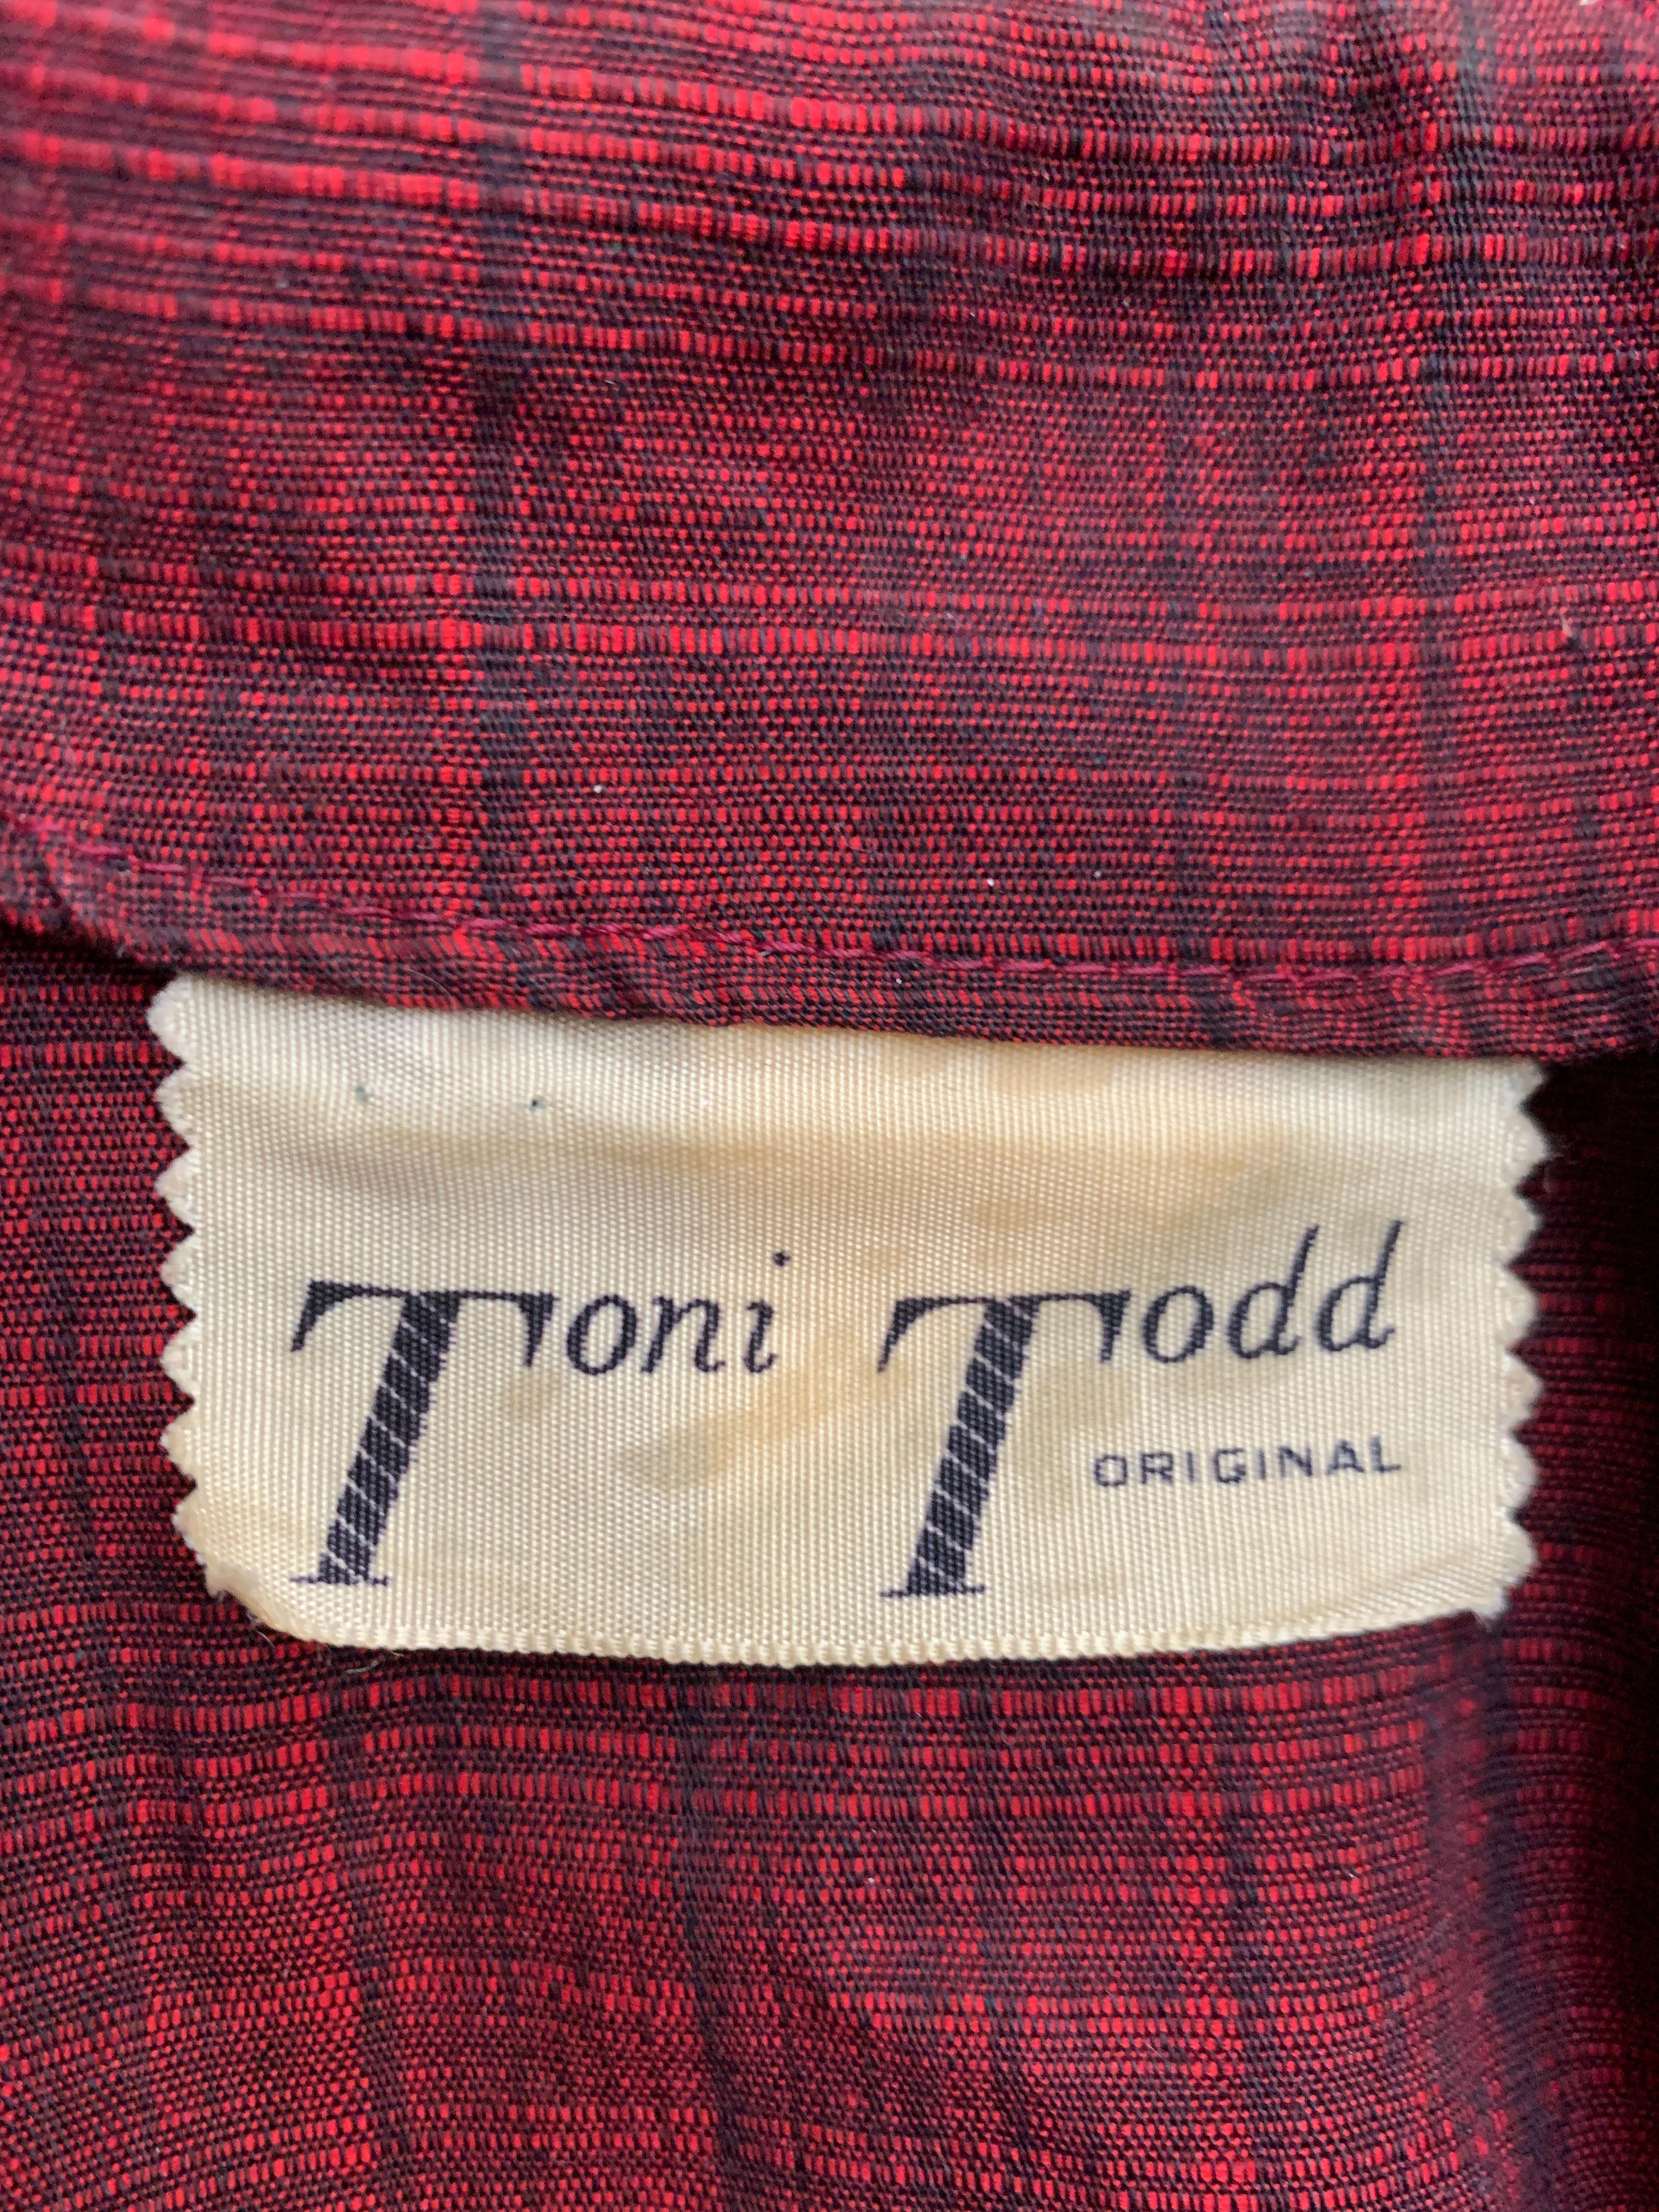 1950s Toni Todd Original Red and Black Shirt Dress with Arrow Novelty Buttons 1